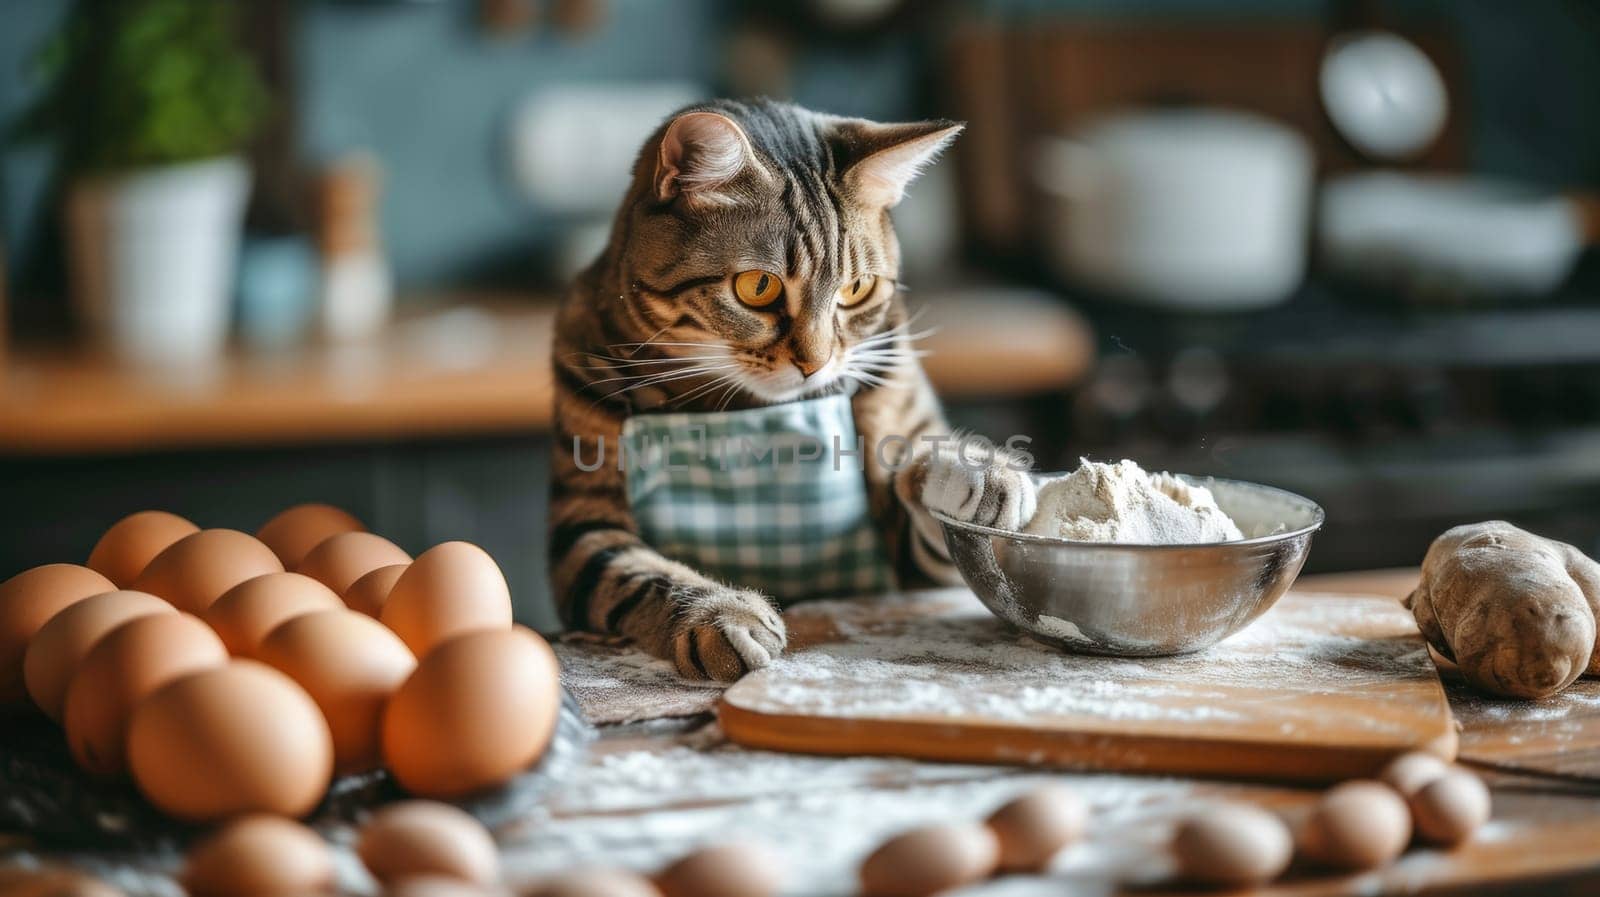 A cat in apron mixing ingredients with bowl and spoon